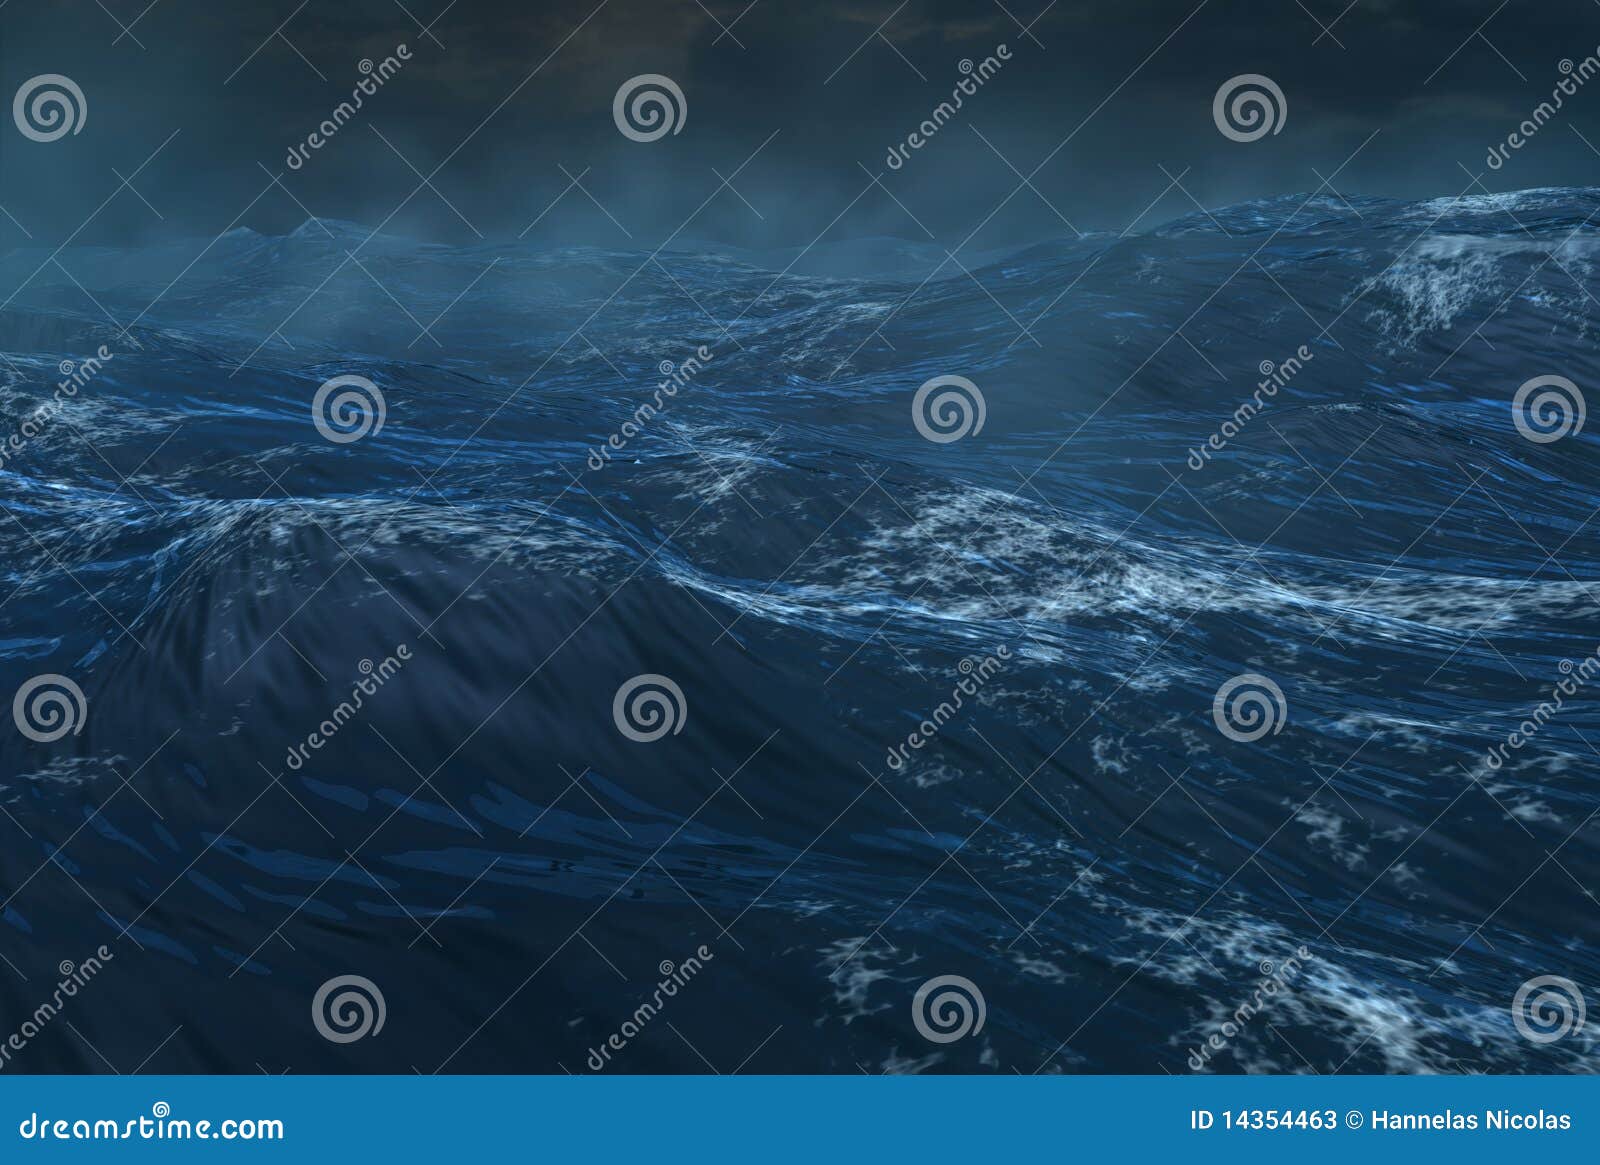 tropical cyclone on the ocean